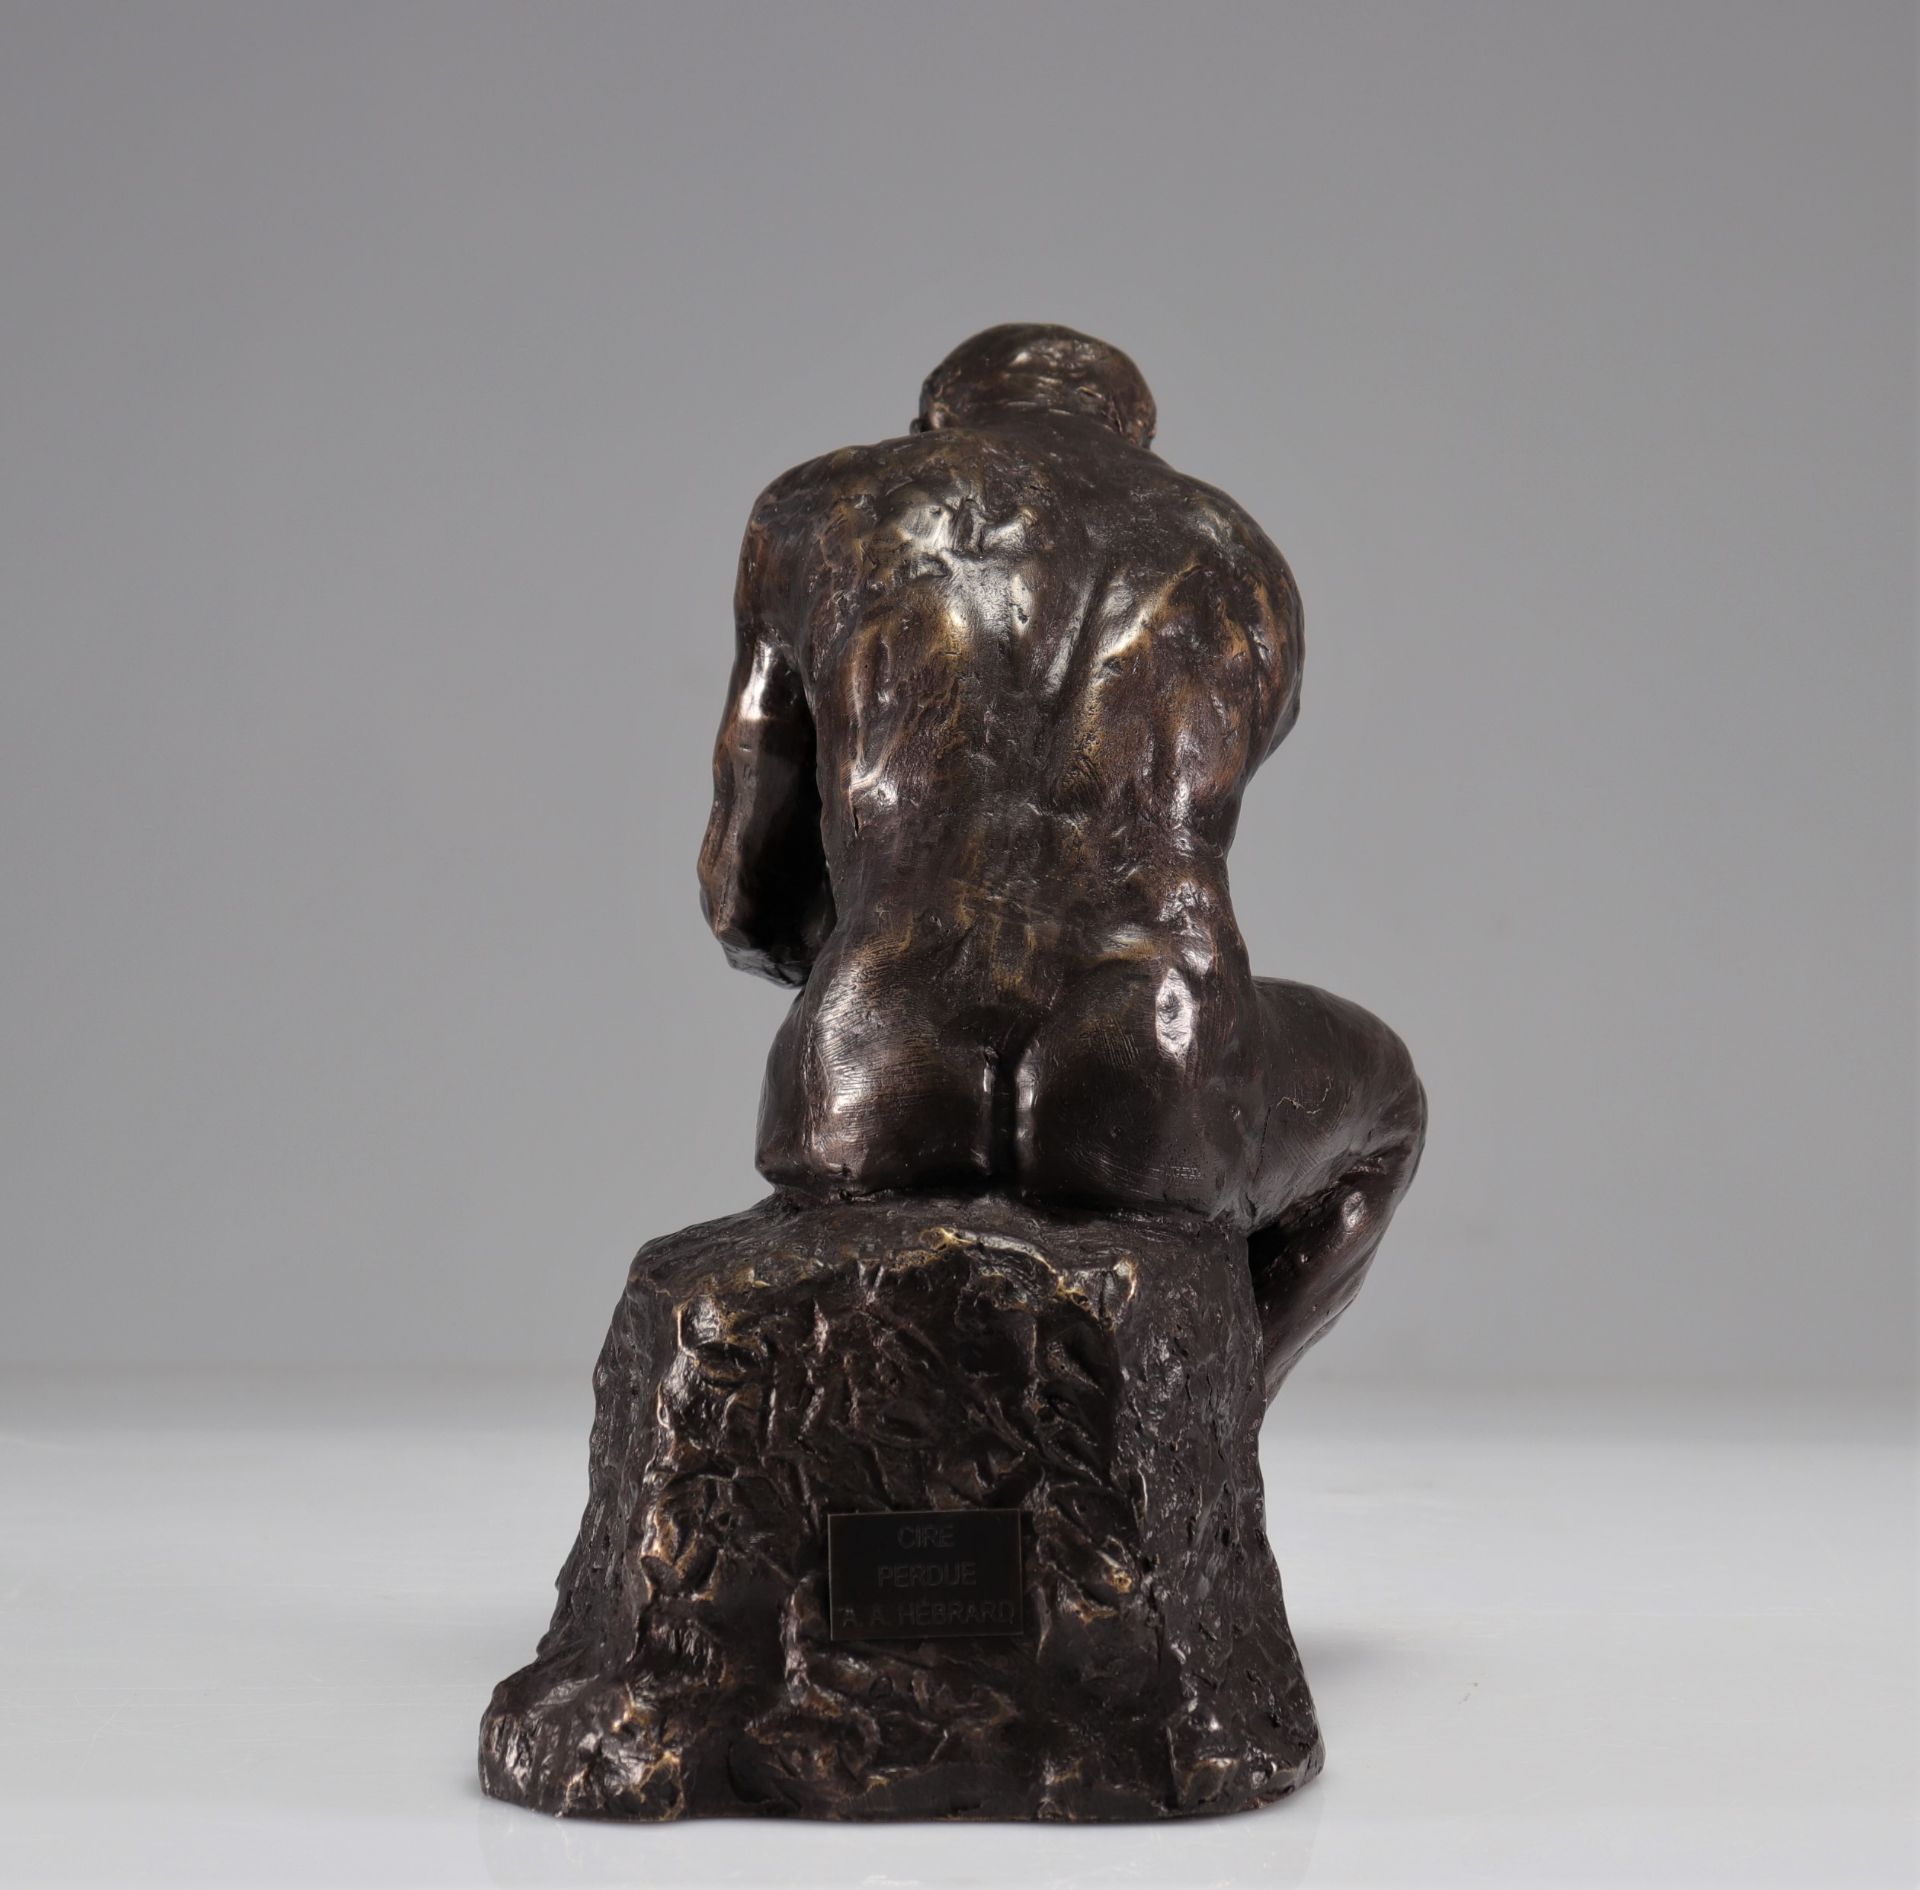 Auguste Rodin (After). " The Thinker ". Lost wax bronze with brown patina. Signed "Rodin" hollow. Be - Image 4 of 6